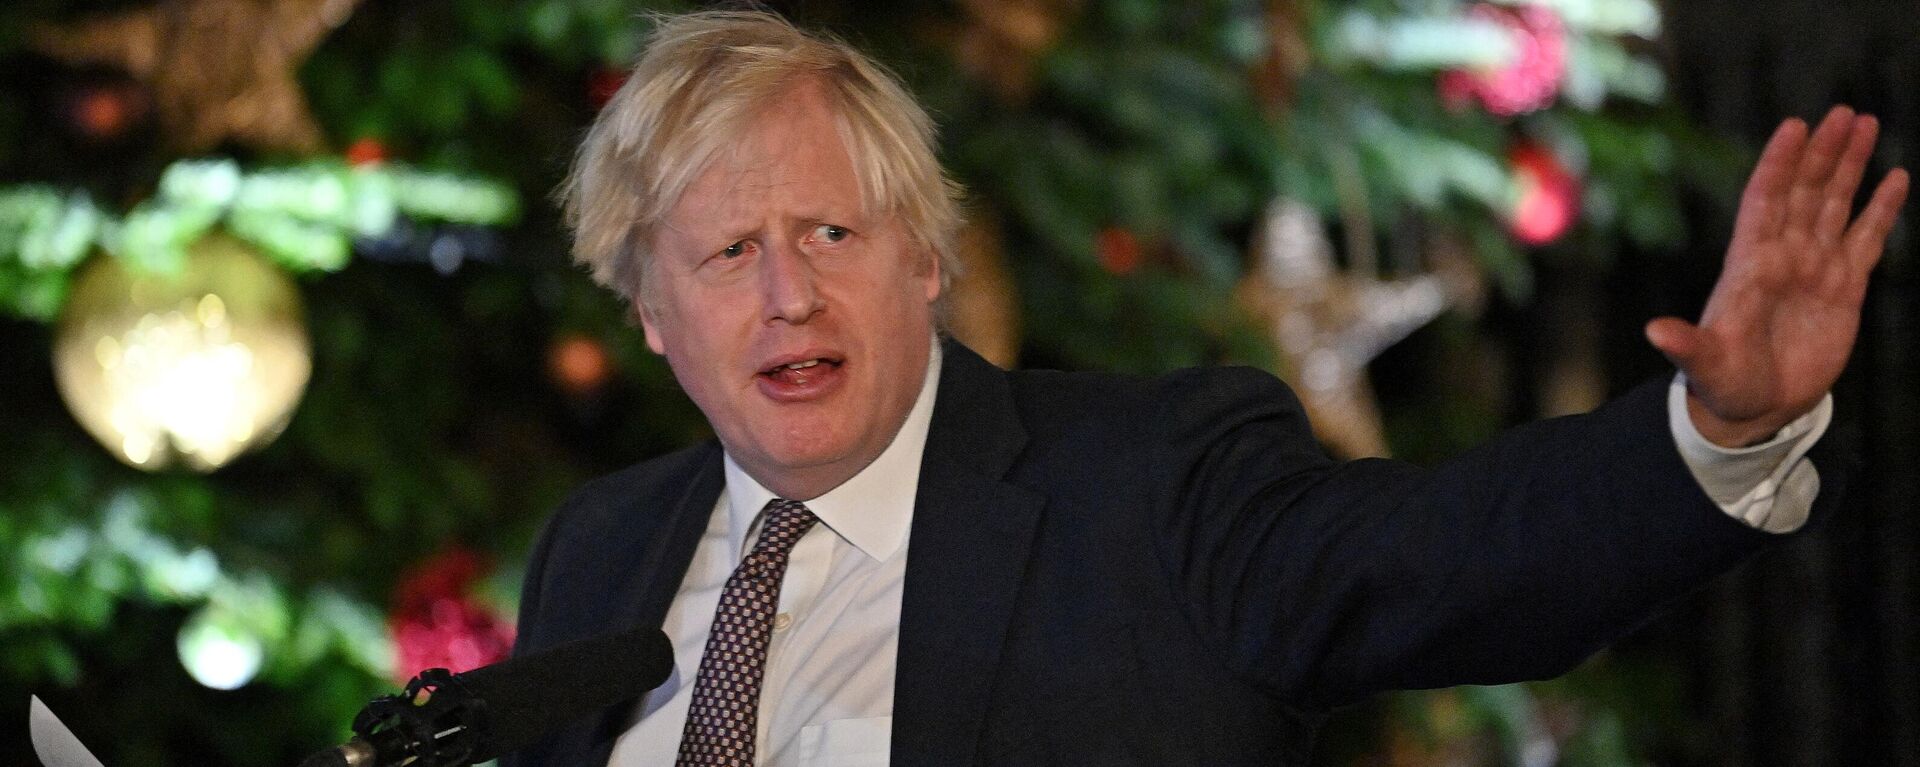 Britain's Prime Minister Boris Johnson makes a speech as he visits a UK Food and Drinks market set up in Downing Street, central London on November 30, 2021. (Photo by JUSTIN TALLIS / POOL / AFP) - Sputnik International, 1920, 10.12.2021